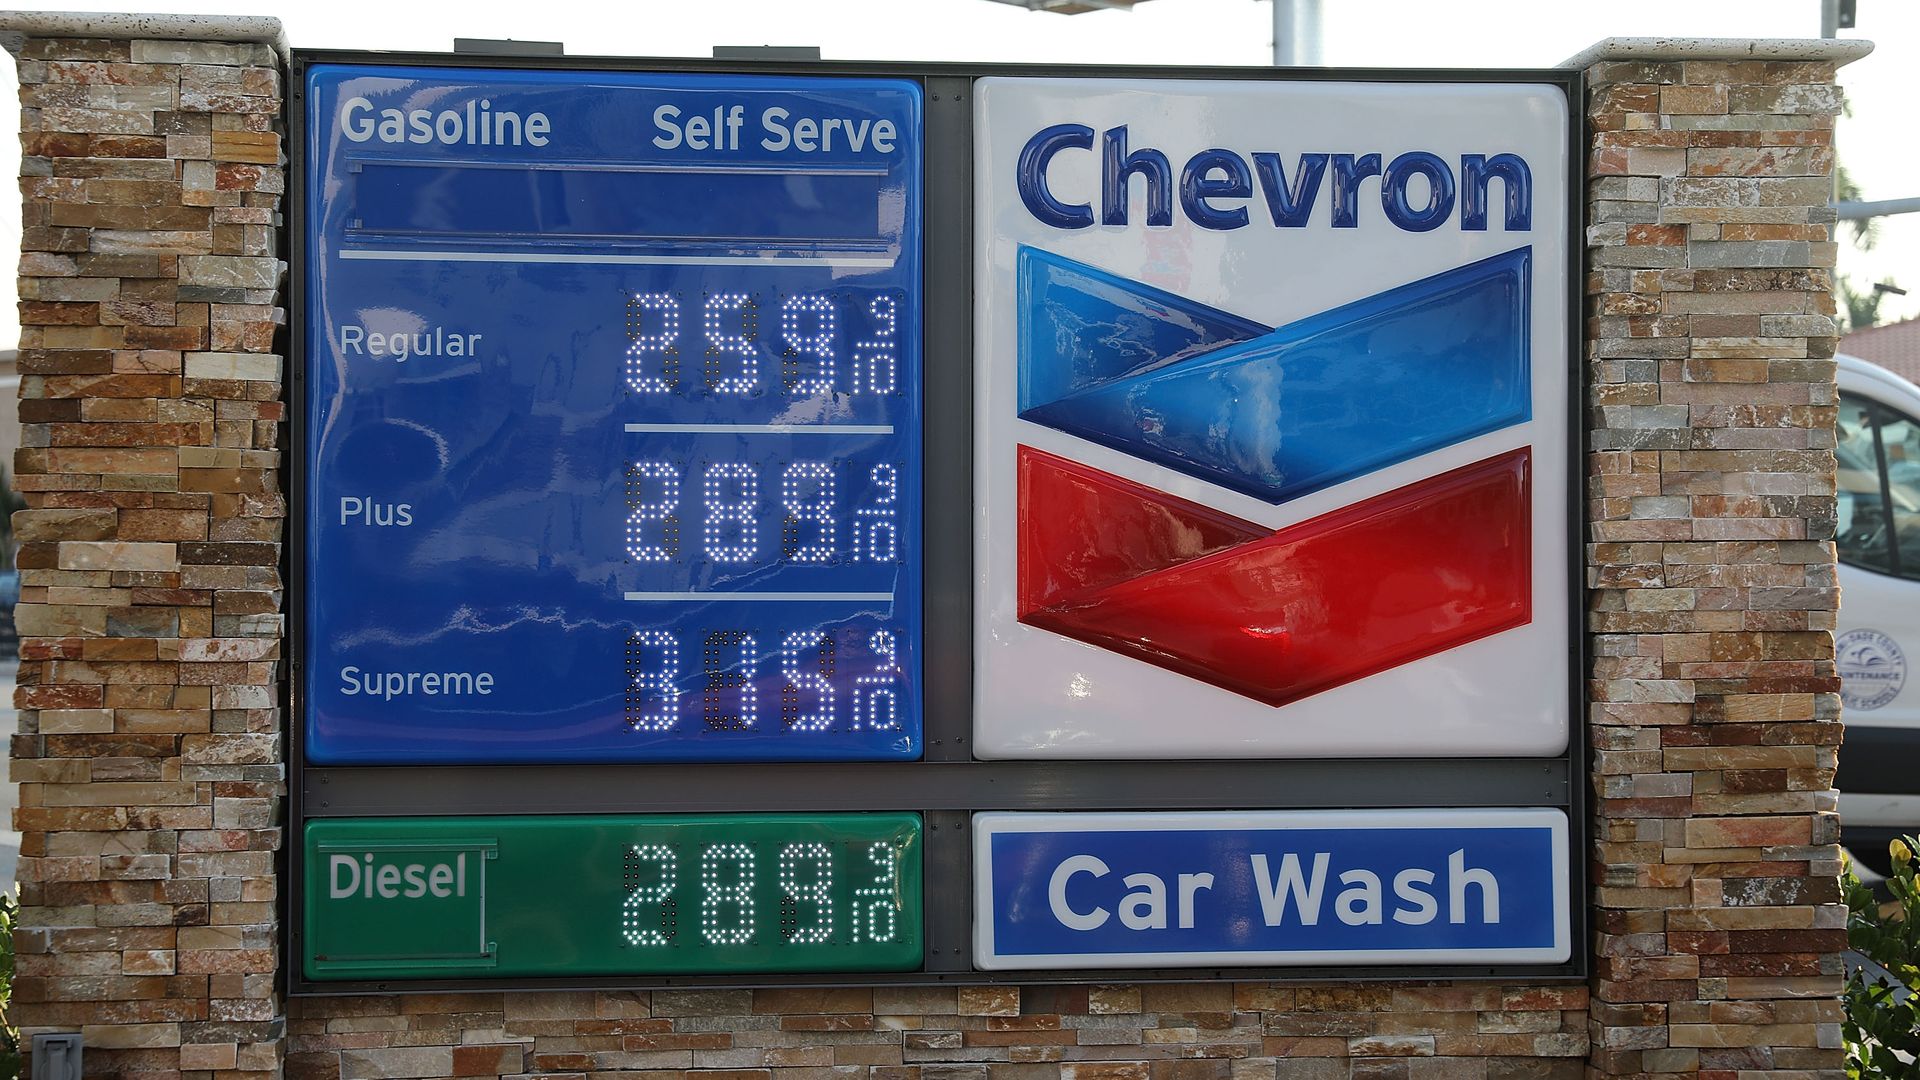 A sign displaying the price of gasoline per gallon is seen at a Chevron gas station